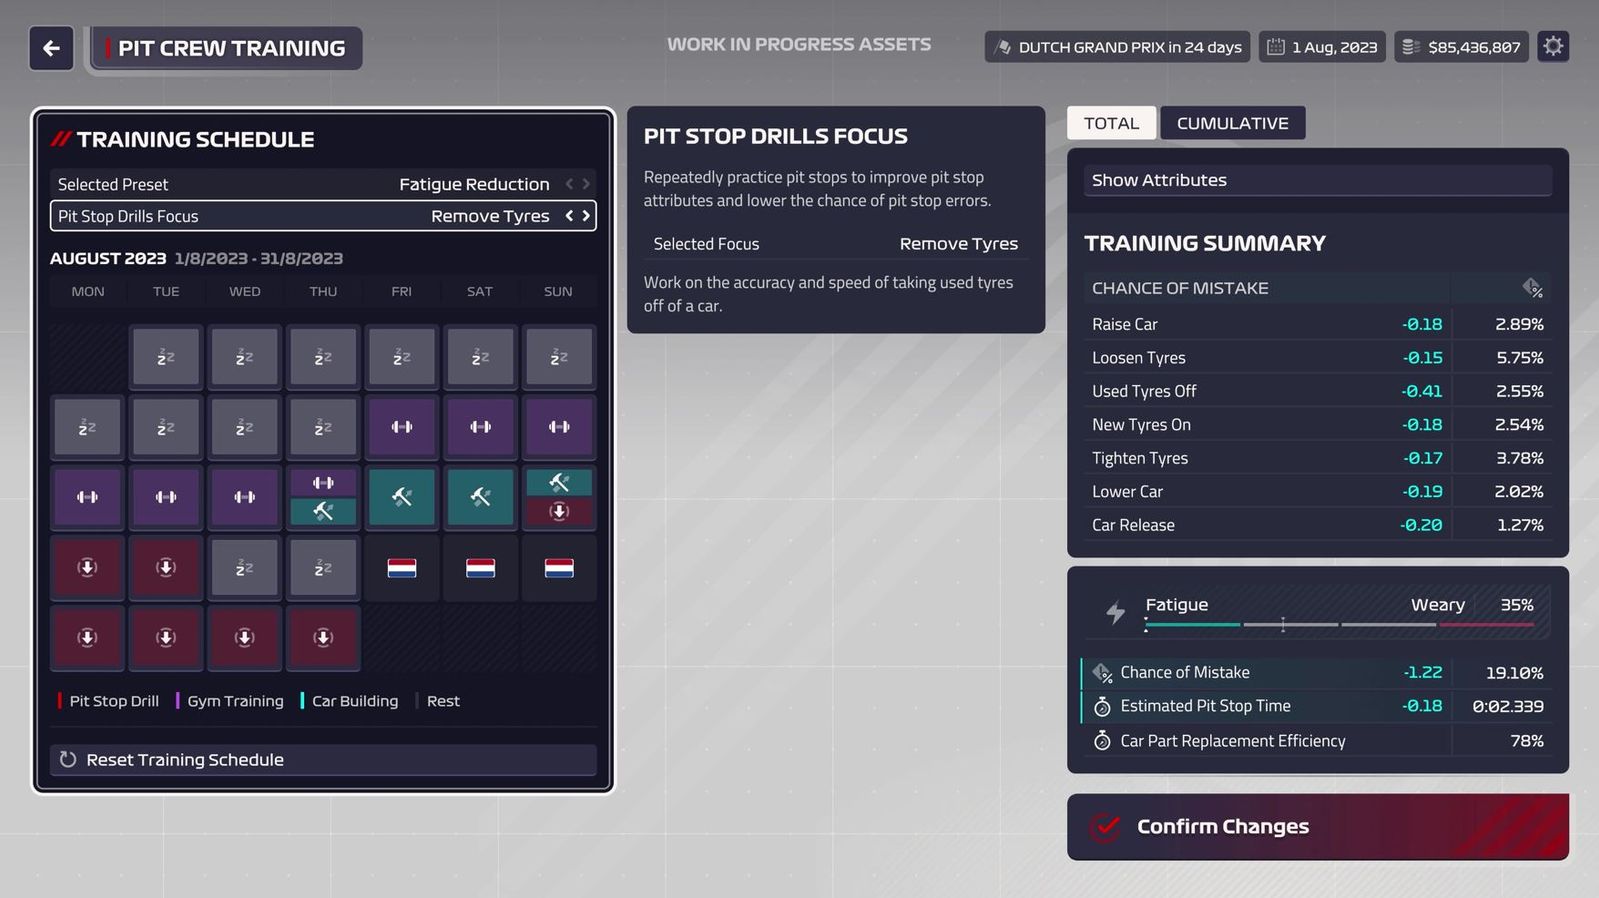 The brand new pit crew training management screen in F1 Manager 2023